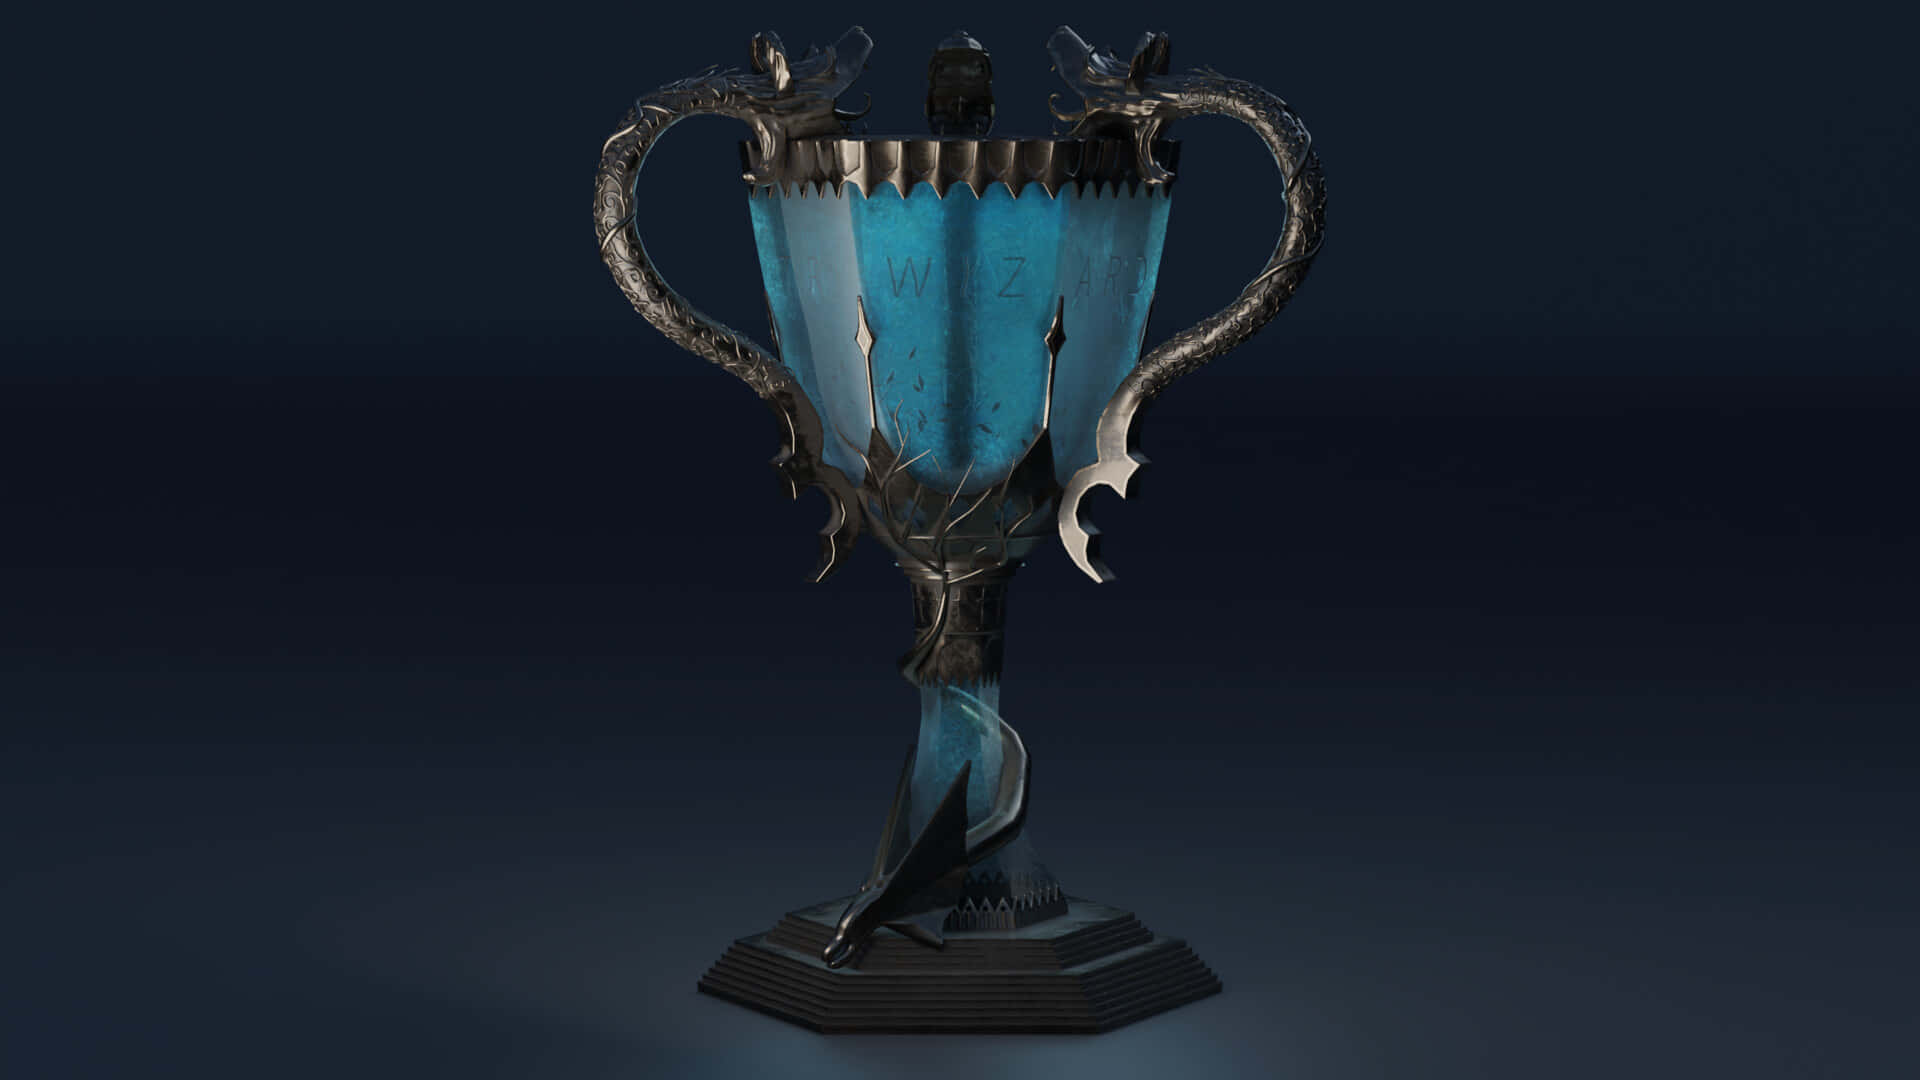 The Triwizard Cup, the mystical artifact of the magical tournament Wallpaper